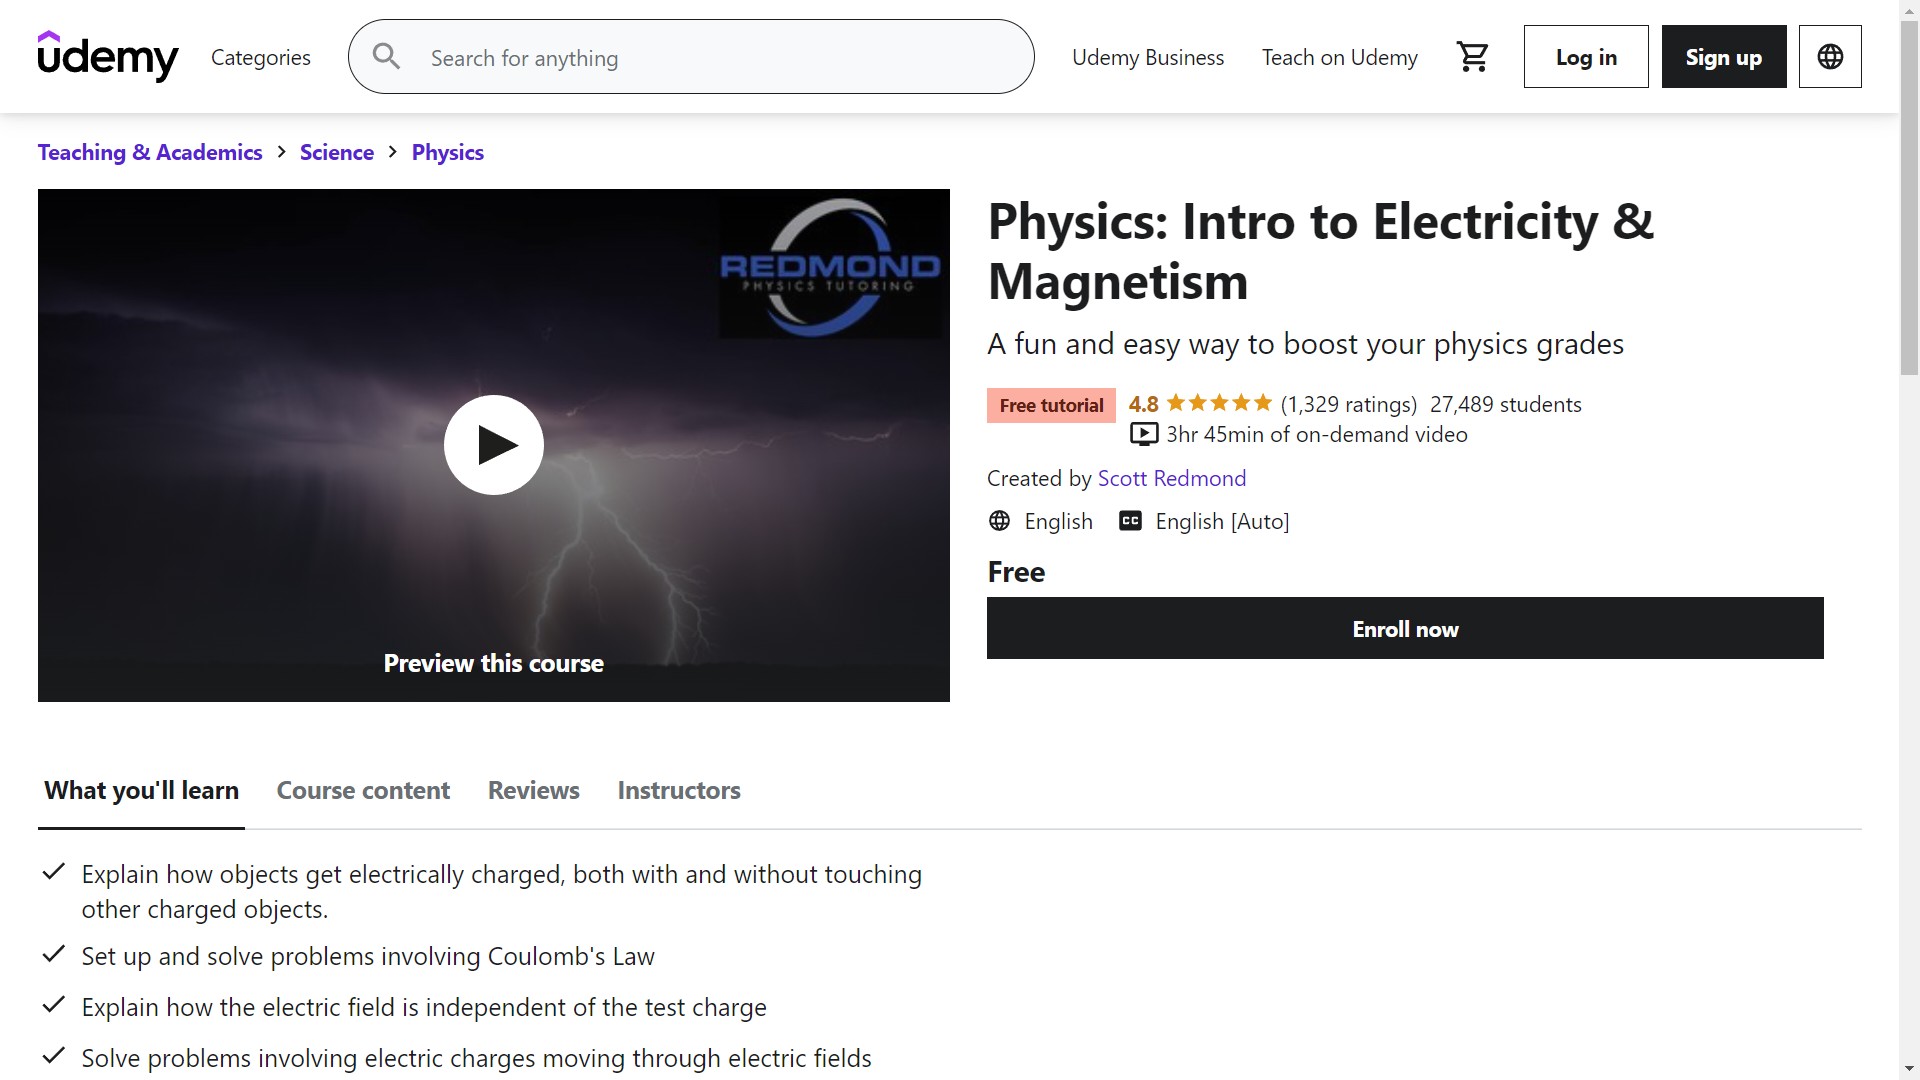 Physics Intro to Electricity and Magnetism. Udemy.